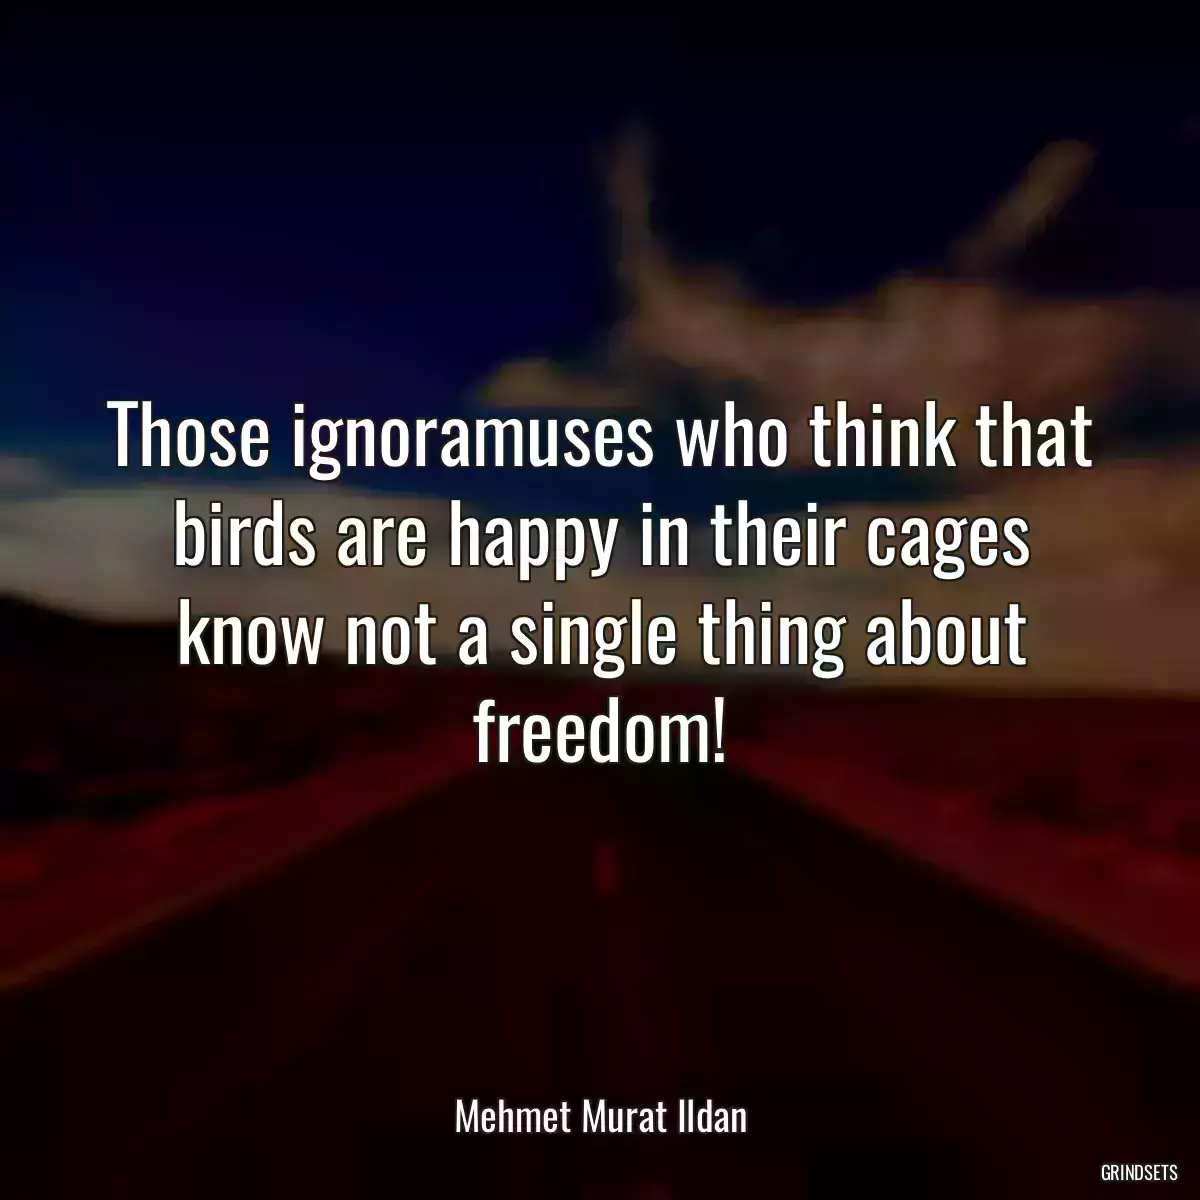 Those ignoramuses who think that birds are happy in their cages know not a single thing about freedom!